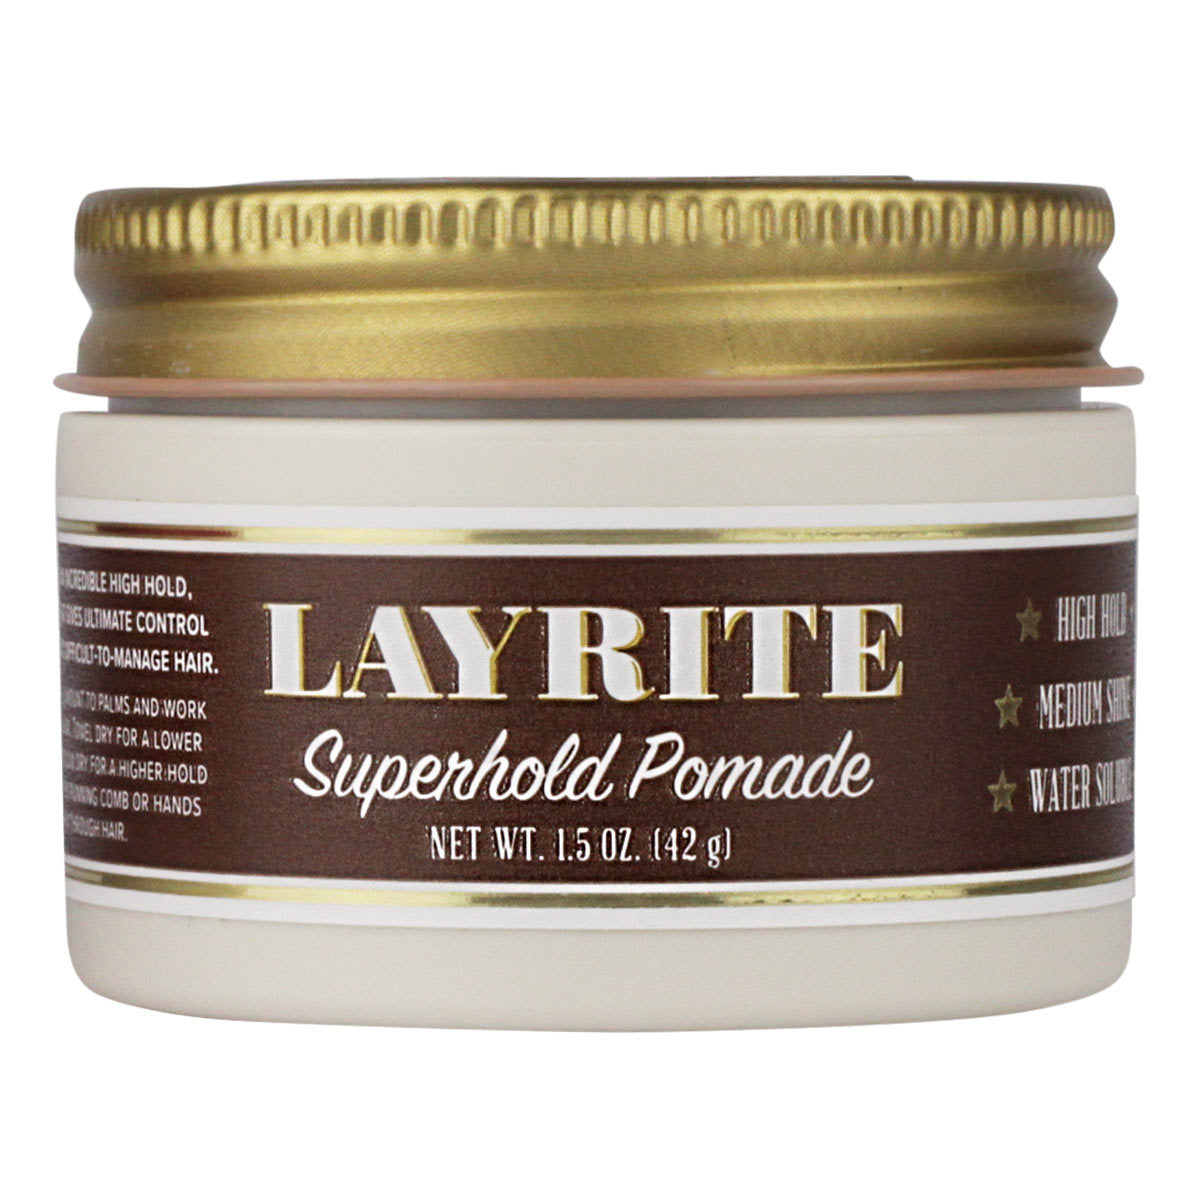 Primary image of Superhold Pomade - Mini